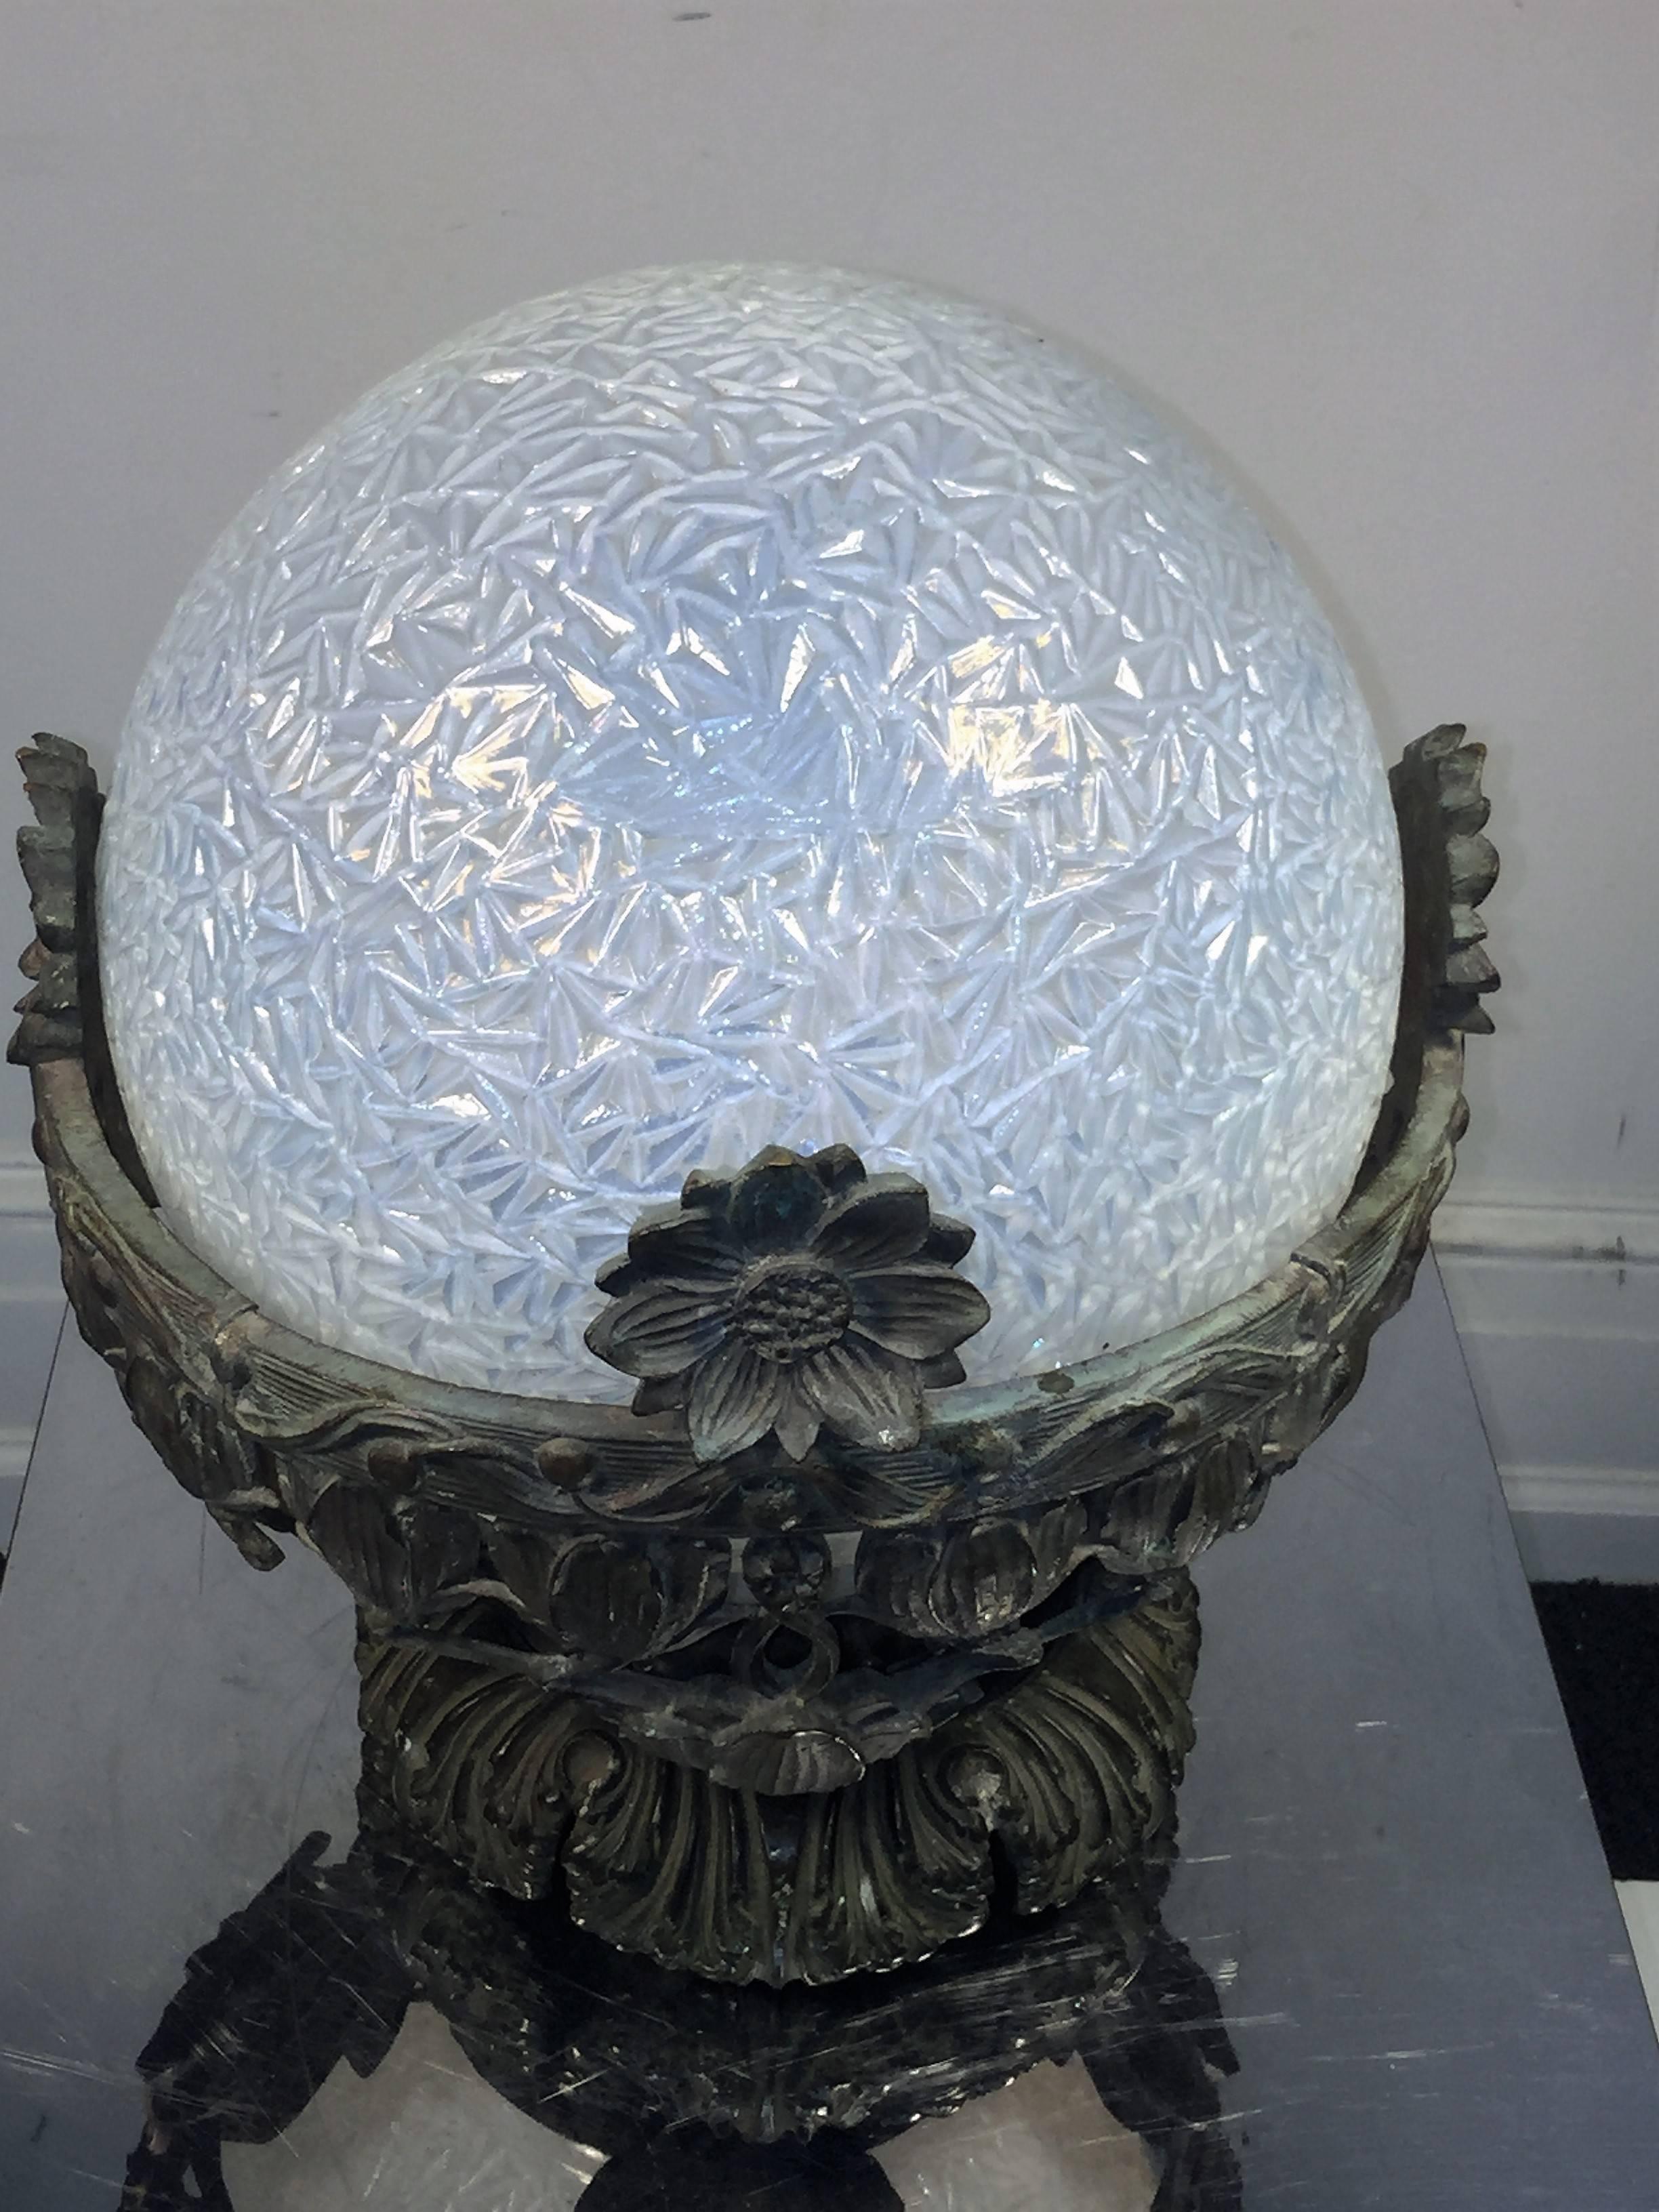 Substantial cast bronze with various flowers and designs. Ice design opalescent pale blue glass sphere is the globe. This is not fitted with a light fixture and needs some adjustment to be hung on the ceiling, but can be done easily enough. Designed